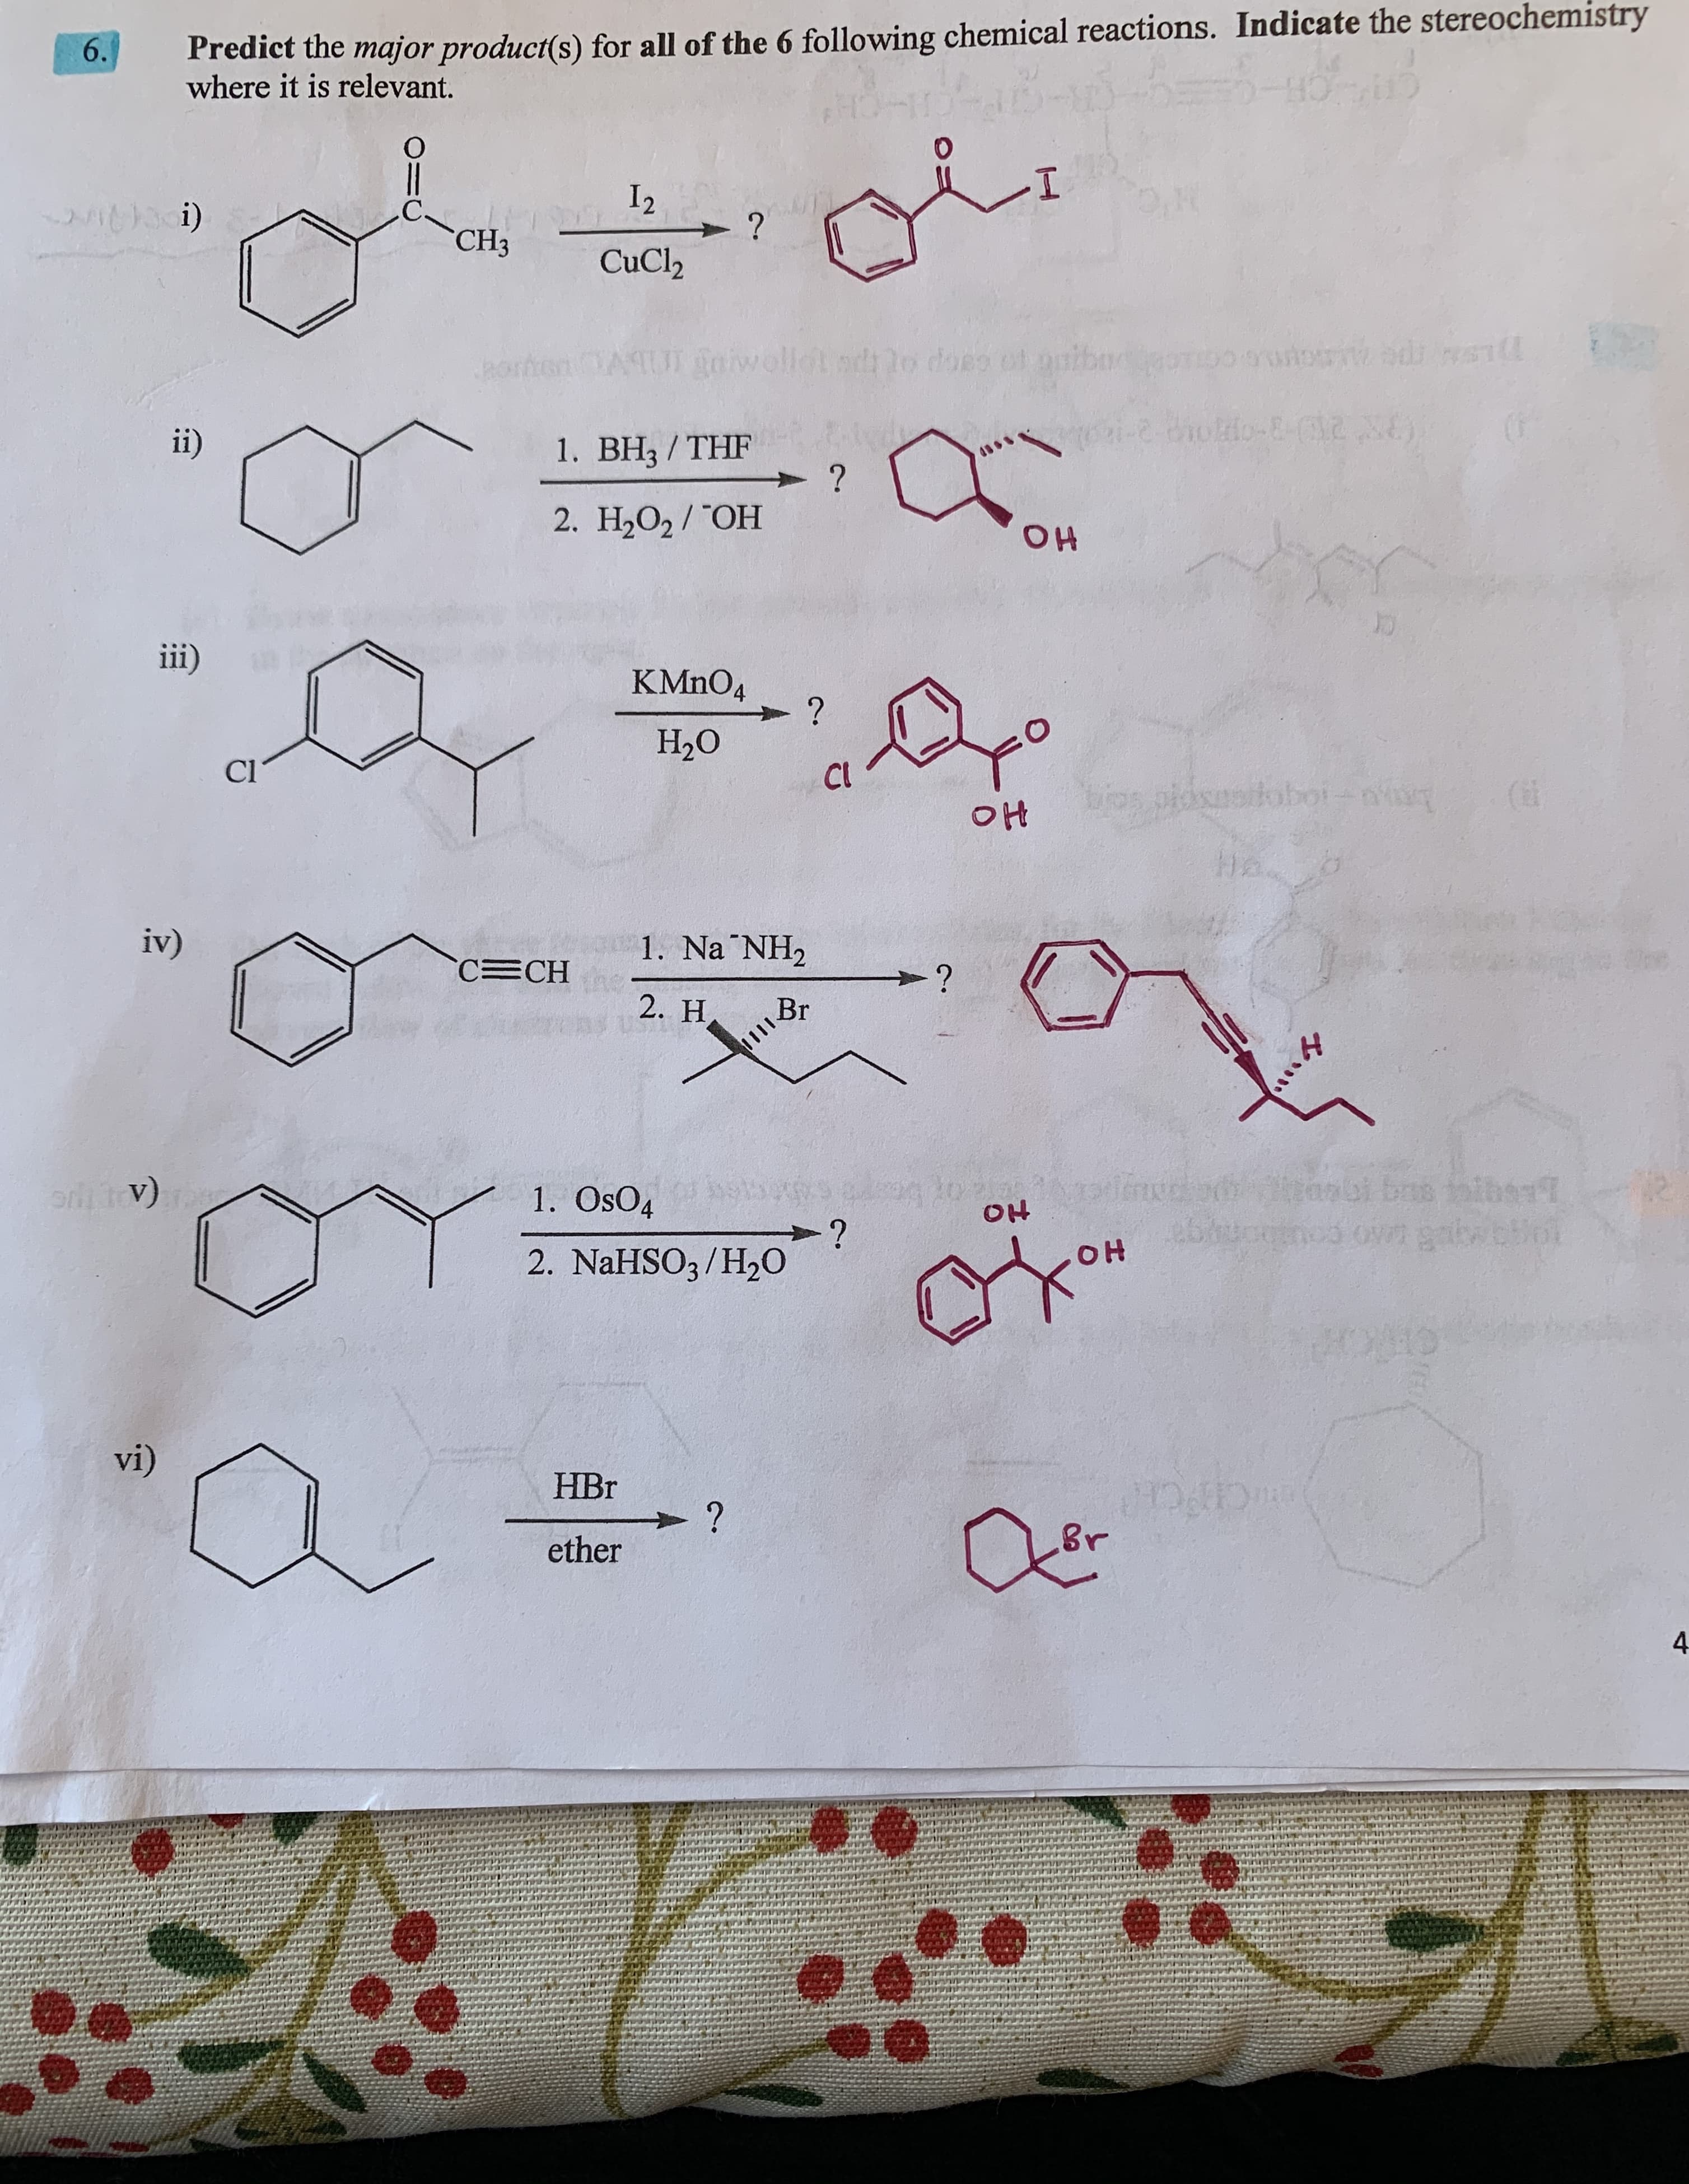 Predict the major product(s) for all of the 6 following chemical reactions. Indicate the stereochemistry
where it is relevant.
6.
I.
I2
?
CuCl2
C.
"СНз
Ur goiwolldt odlo does ot ouibooouow adi wll
Borhe
-2 01okio-8-2
ii)
1. BH3 / THF
2. H,О2/"ОН
OH
iii)
KMNO4
Н.О
Cl
CI
bos ploseeioboi-n
Ha
iv)
1. Na NH2
C CH
2. H
bns tolbs
1. OsO4
OH
-?
2. NaHSO3/H20
он
vi)
НBr
?
CPCH
ether
4.
